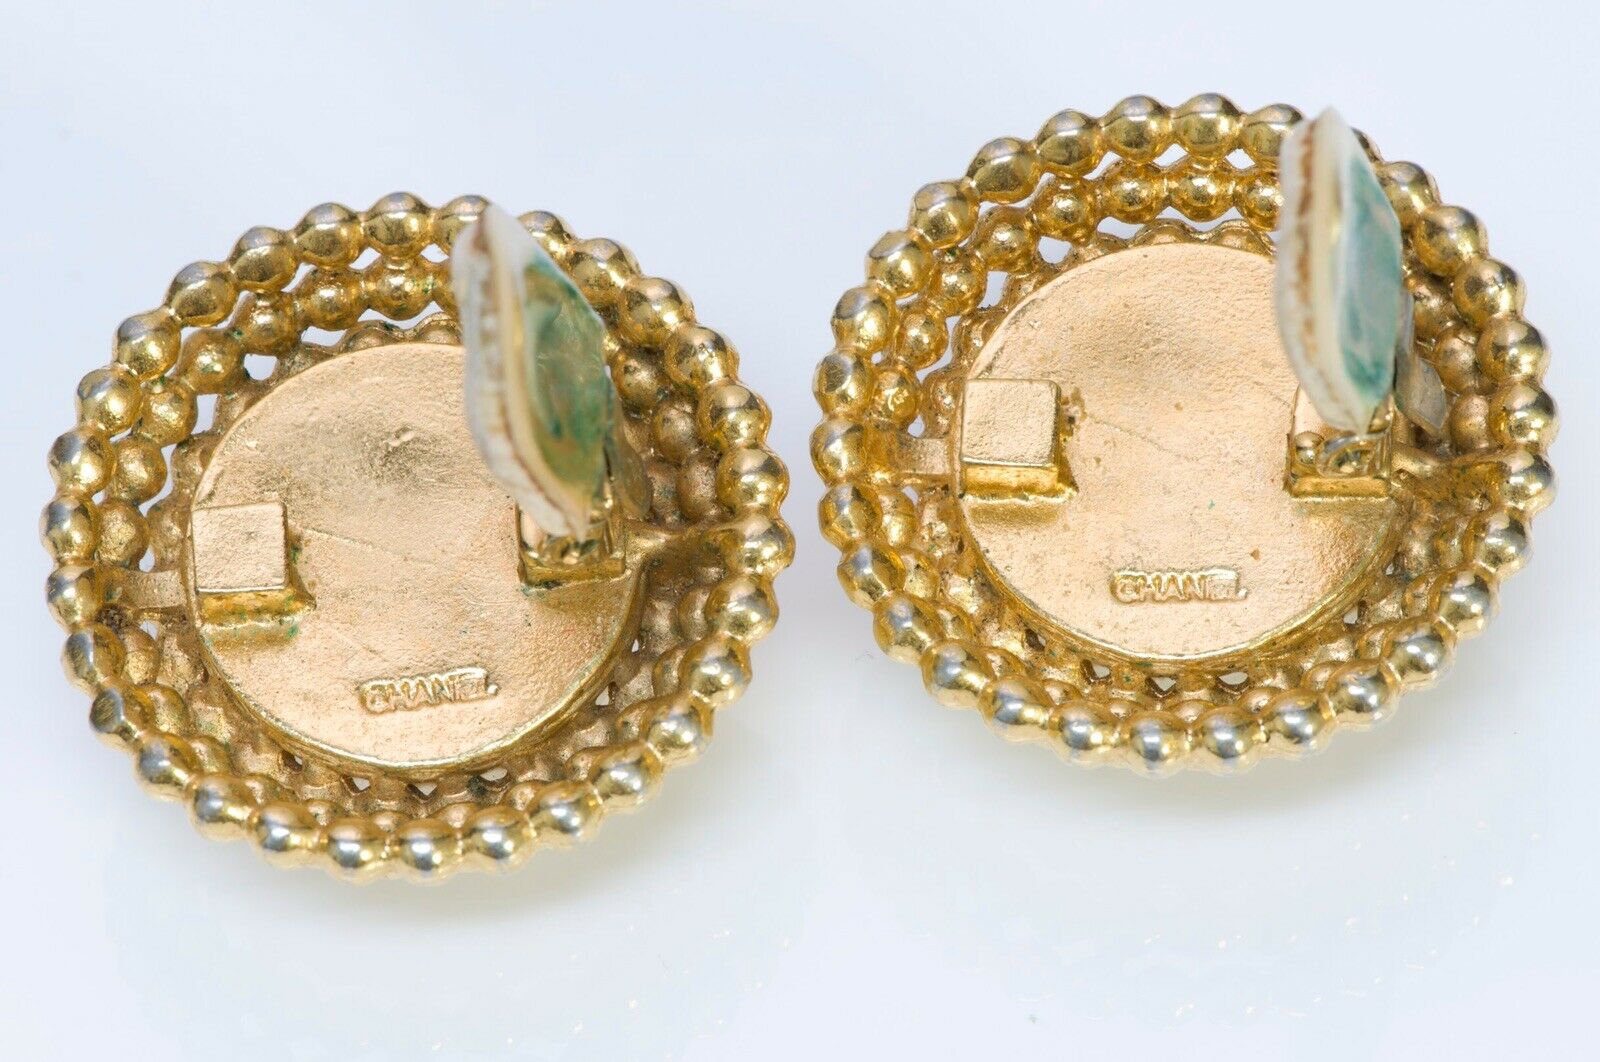 Vintage CHANEL Textured Round Pearl Earrings